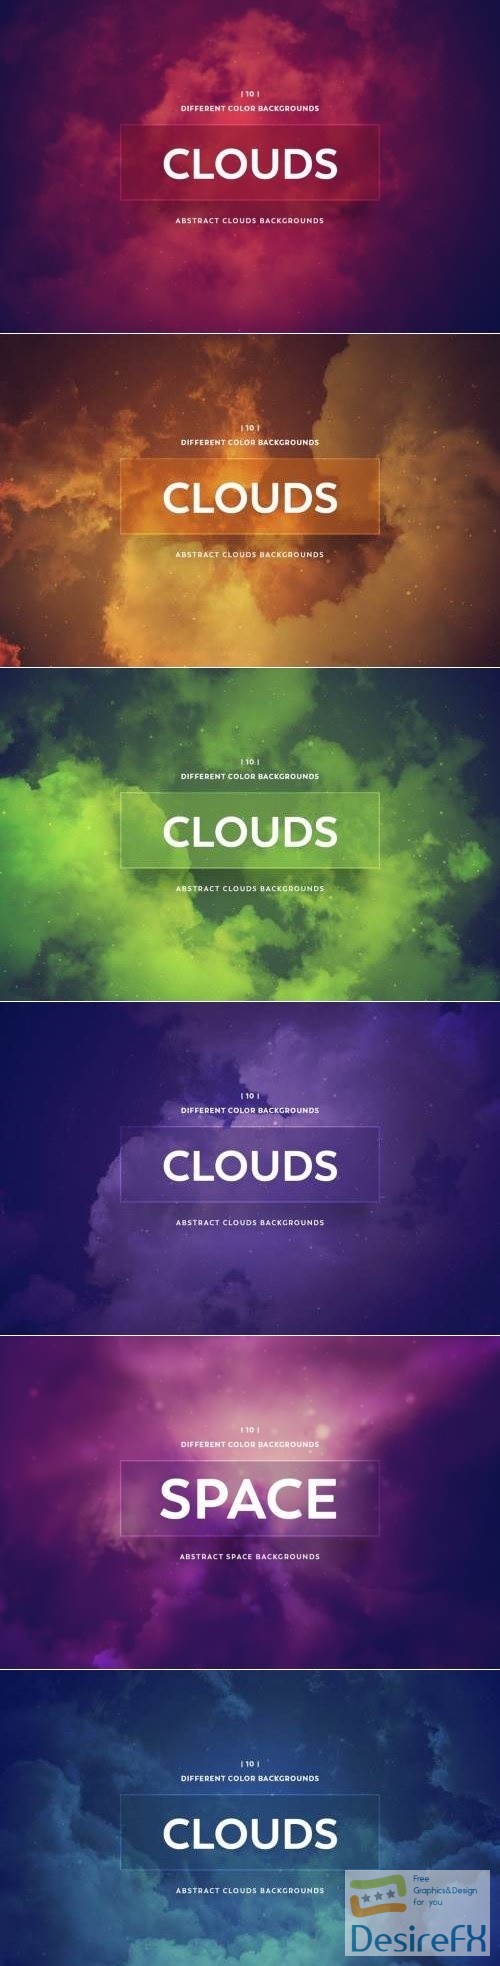 Abstract Clouds Backgrounds Bundle